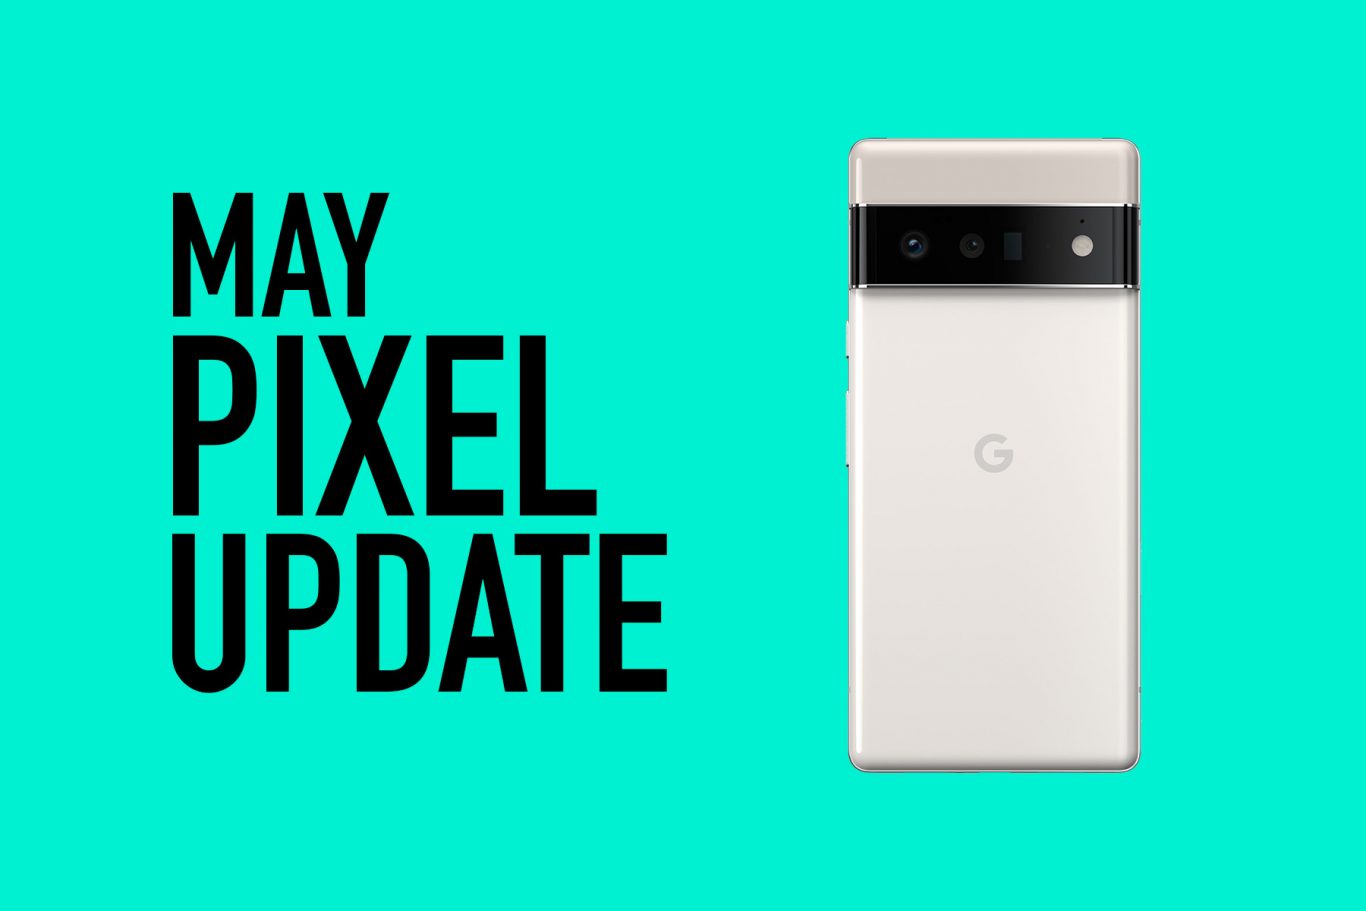 Your Google Pixel Phone's May Update Arrived